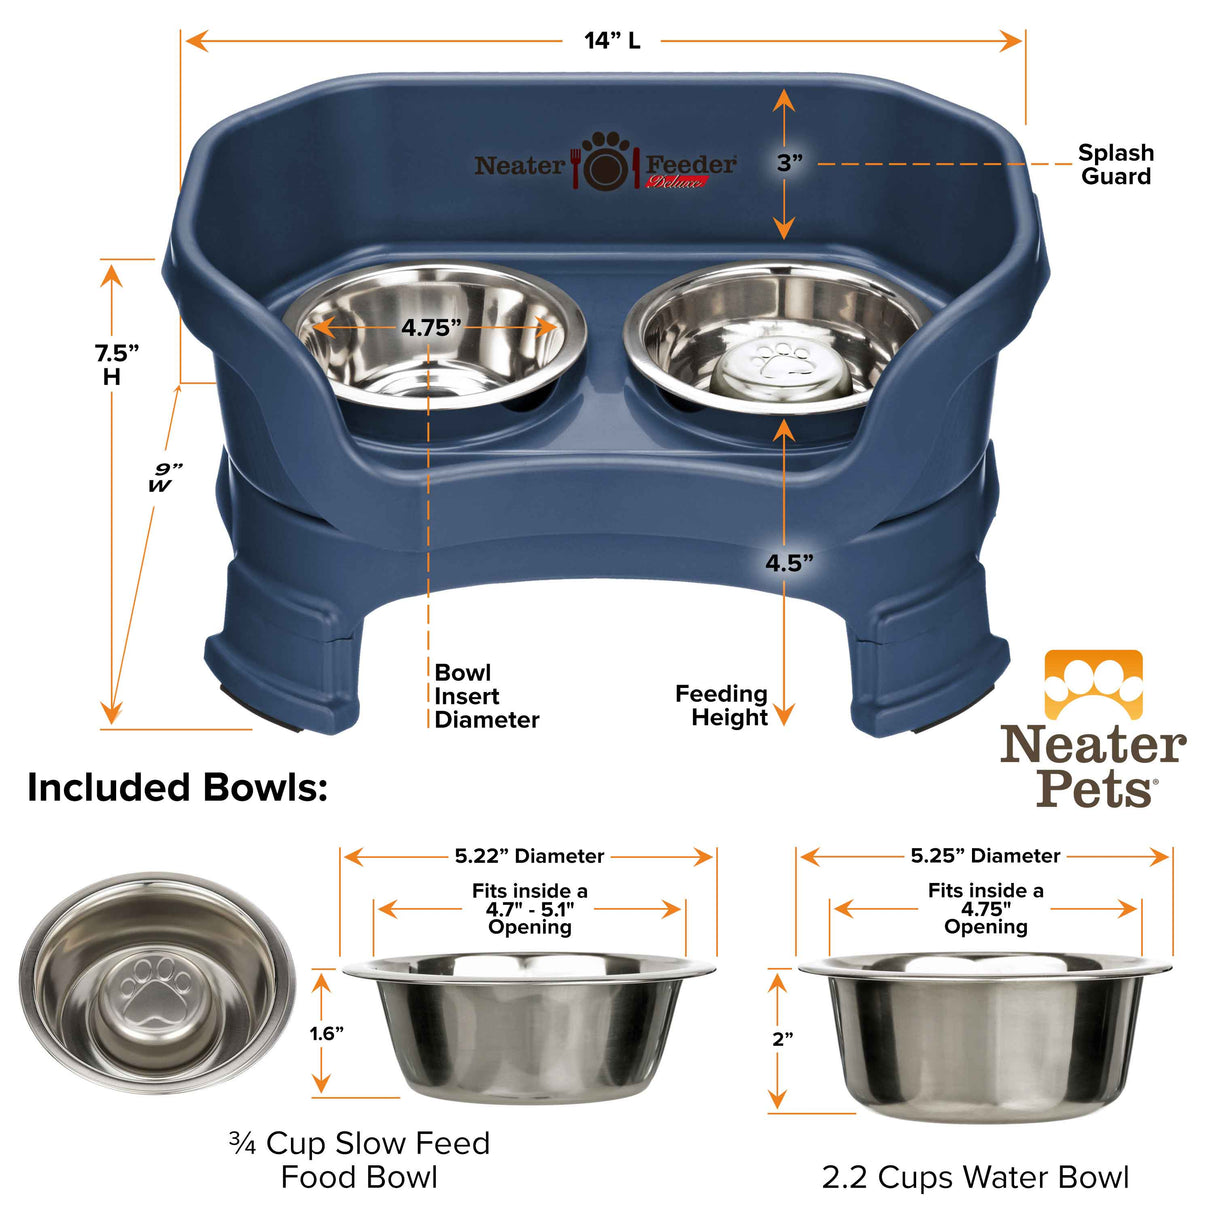 Dark Blue SMALL DELUXE LE Neater Feeder with Stainless Steel Slow Feed Bowl dimensions